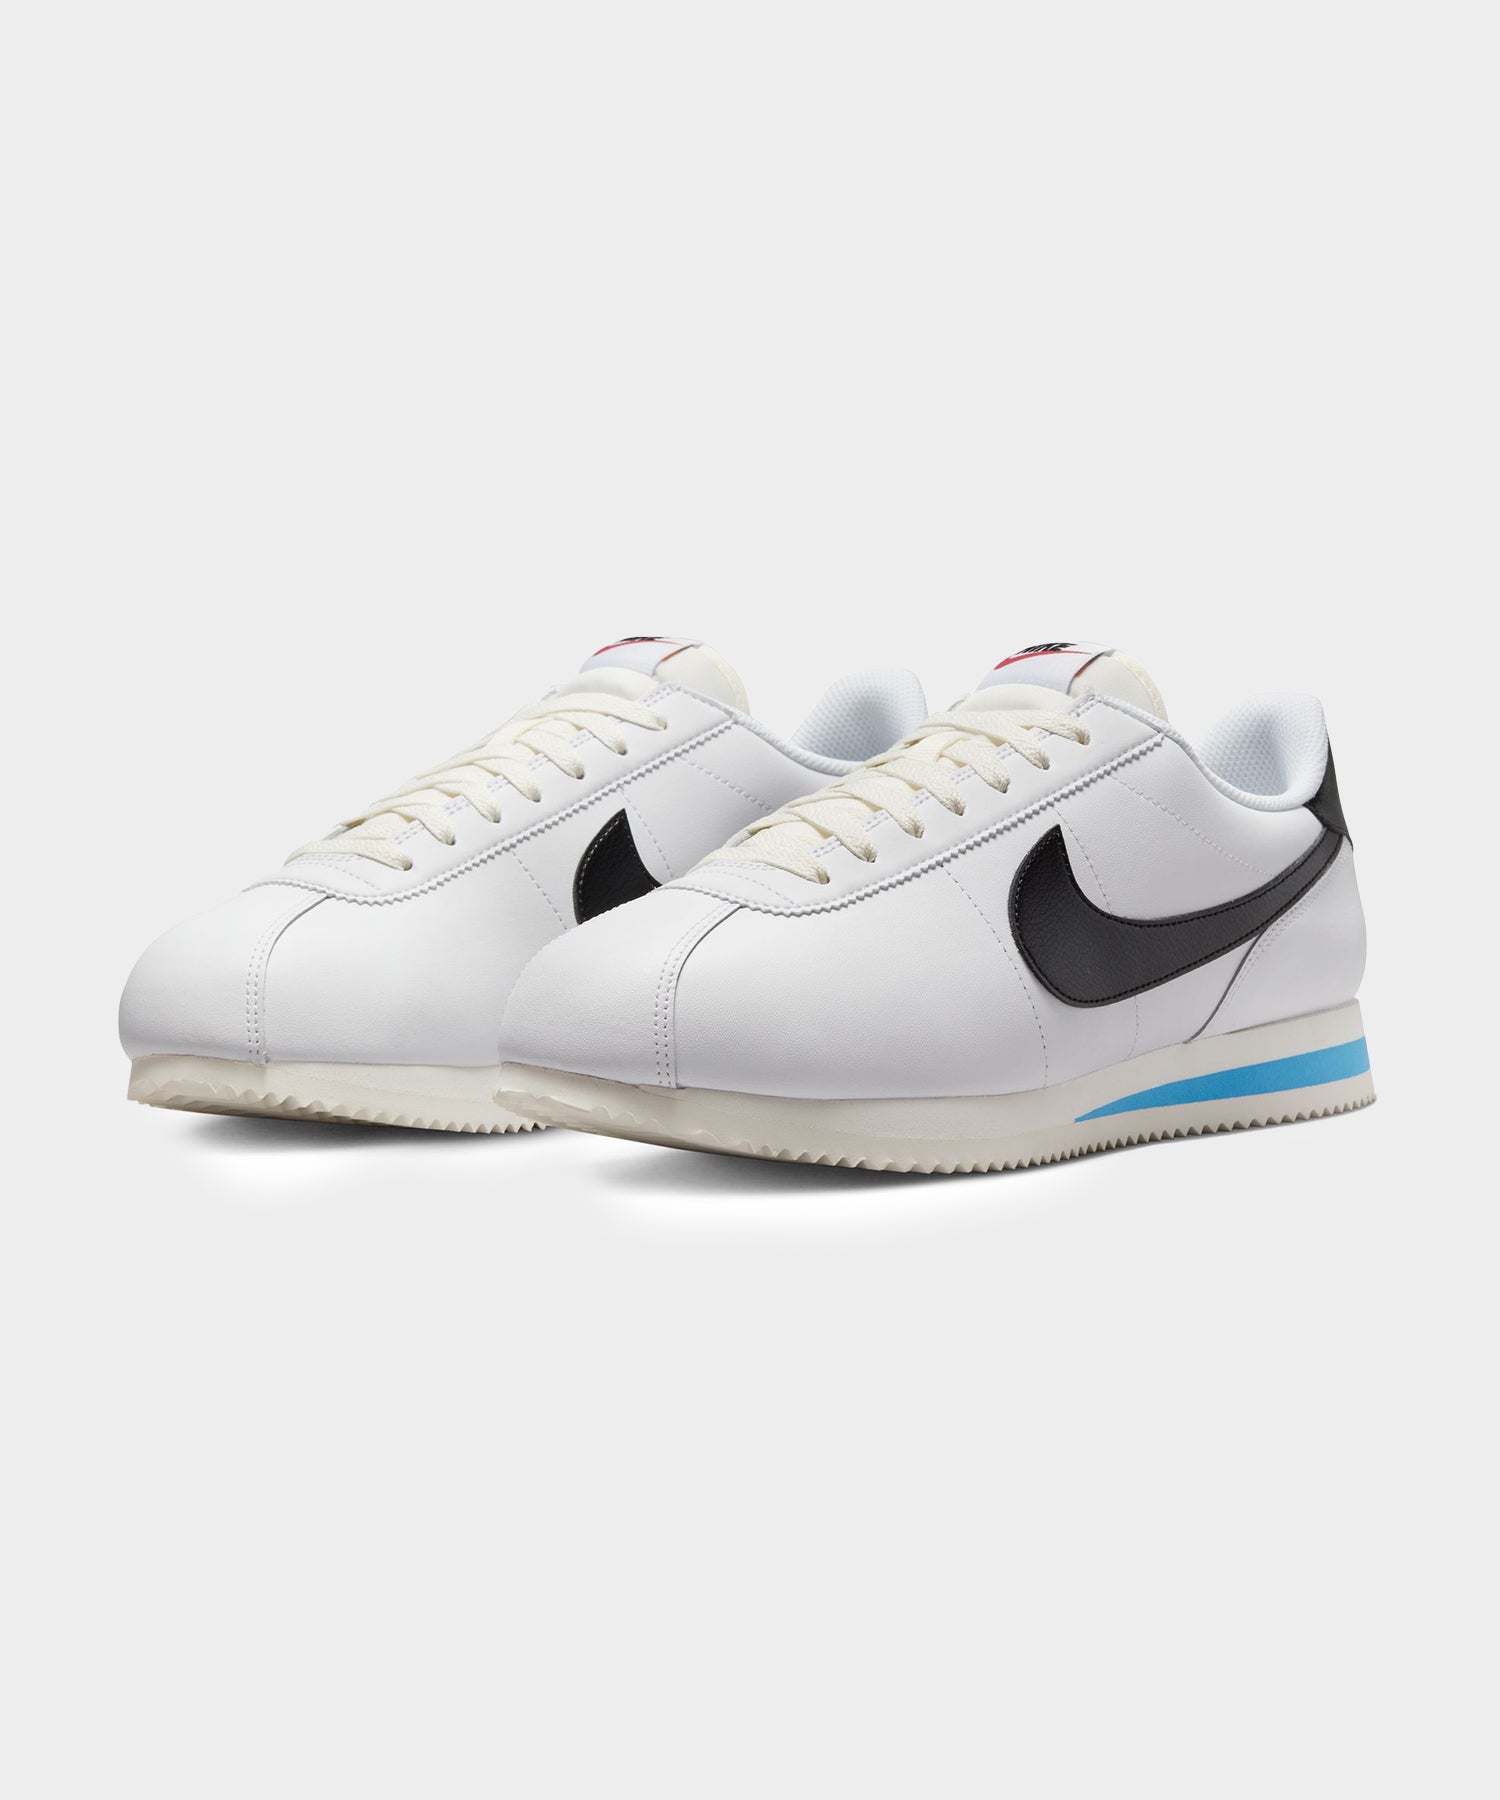 WHAT HAPPENED TO THE NIKE CORTEZ??